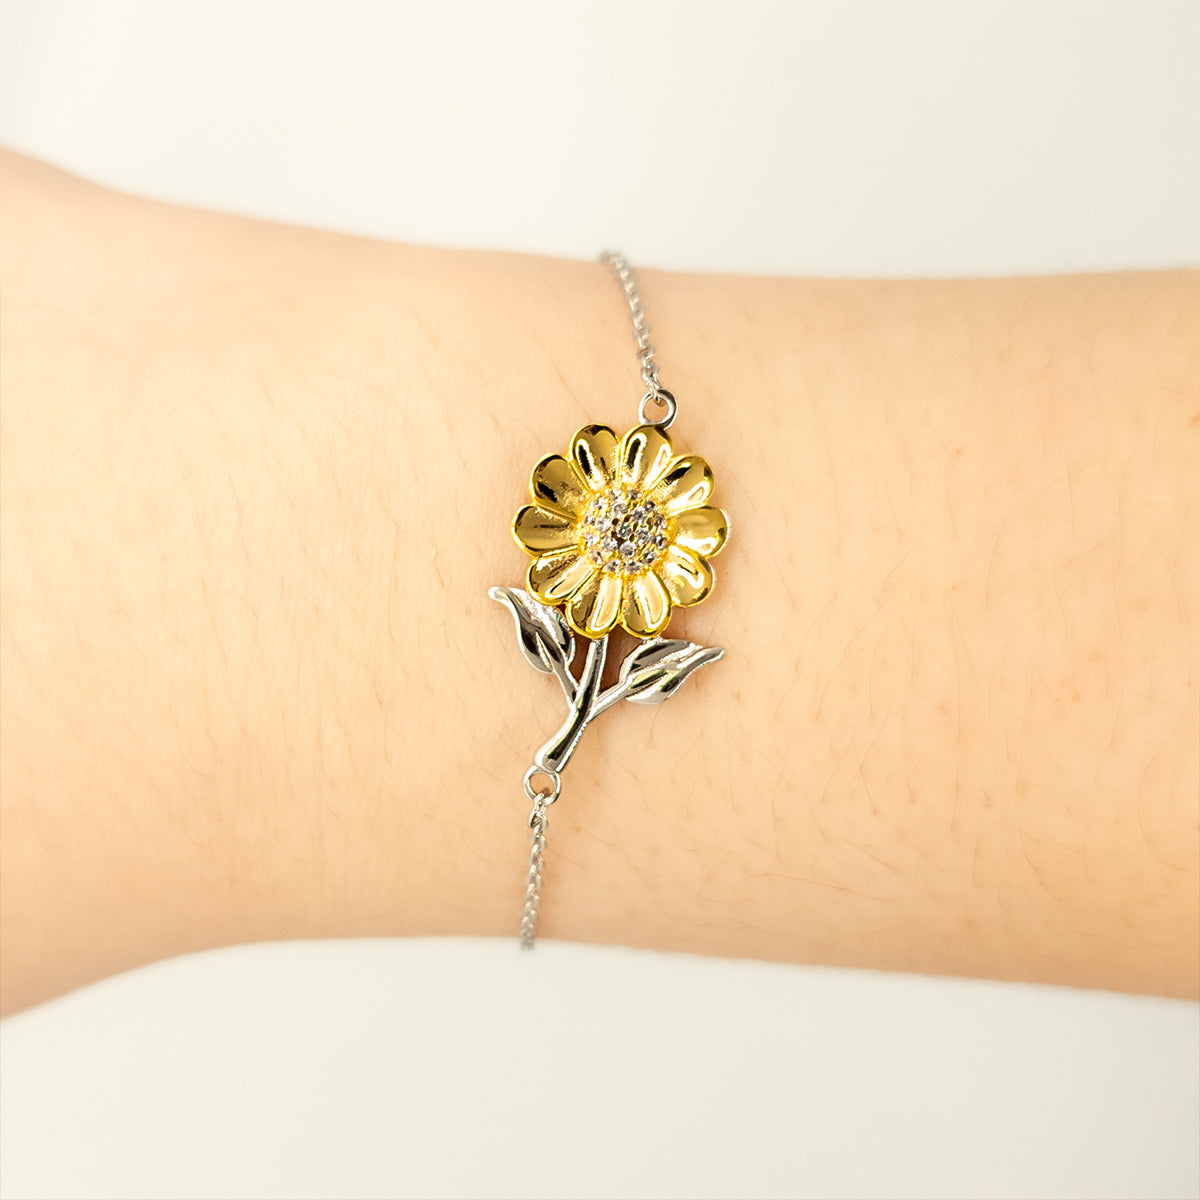 To My Amazing Bonus Brother Supporting Sunflower Bracelet, Life is an adventure waiting to be explored, Birthday Unique Gifts for Bonus Brother from Sister.